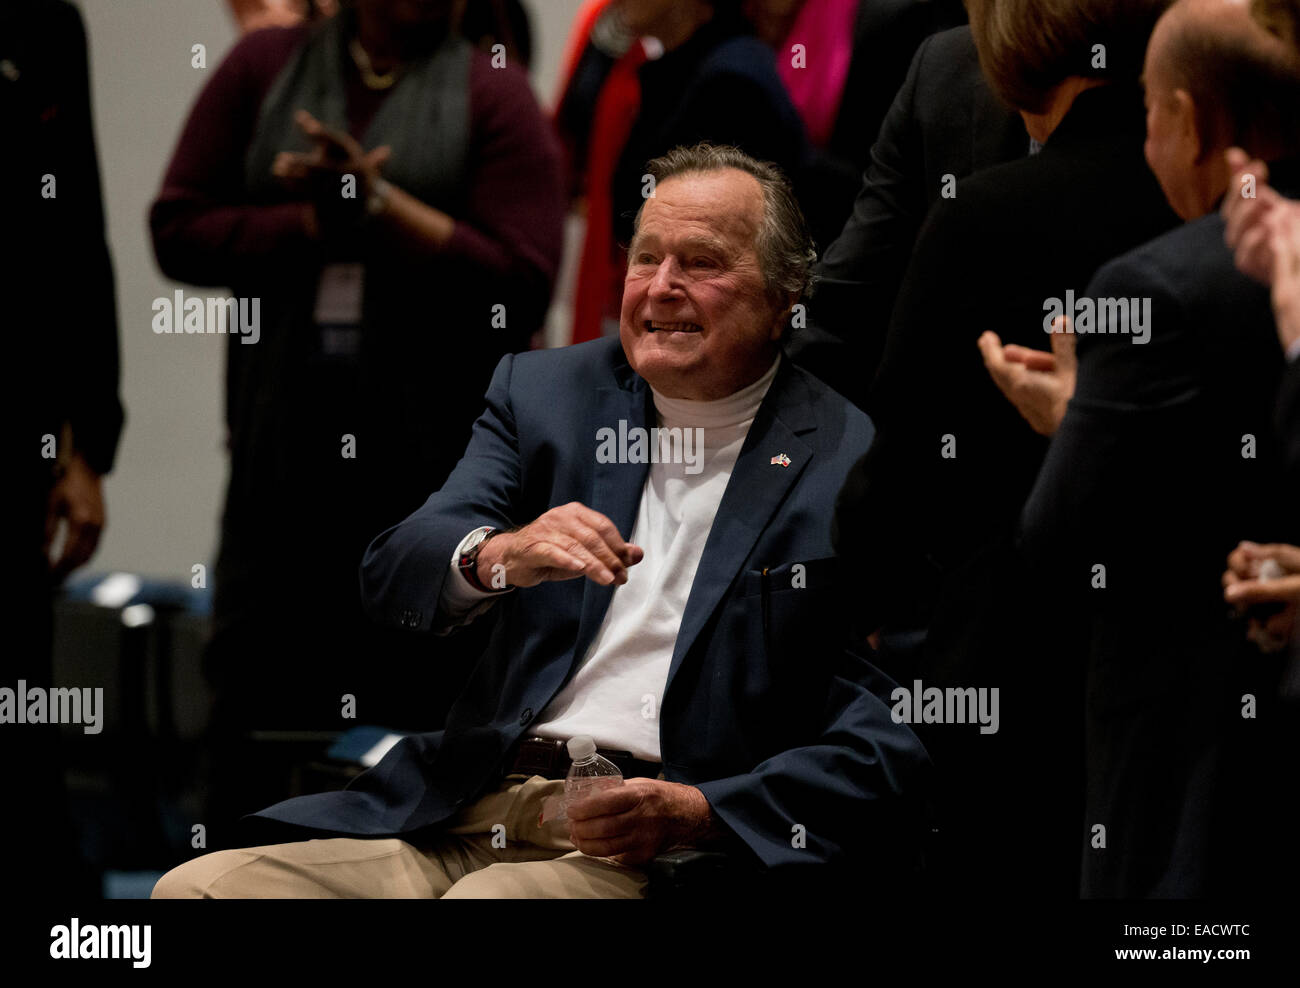 College Station, Texas, USA. 11th November, 2014. Former U.S. President George H. W. Bush waves as his son former President George W. Bush talks about his new book, "41_A Portrait of My Father"  during a book event at the Bush Library at Texas A&M University. Bush, 90, was the 41st President of the United States. Credit:  Bob Daemmrich/Alamy Live News Stock Photo